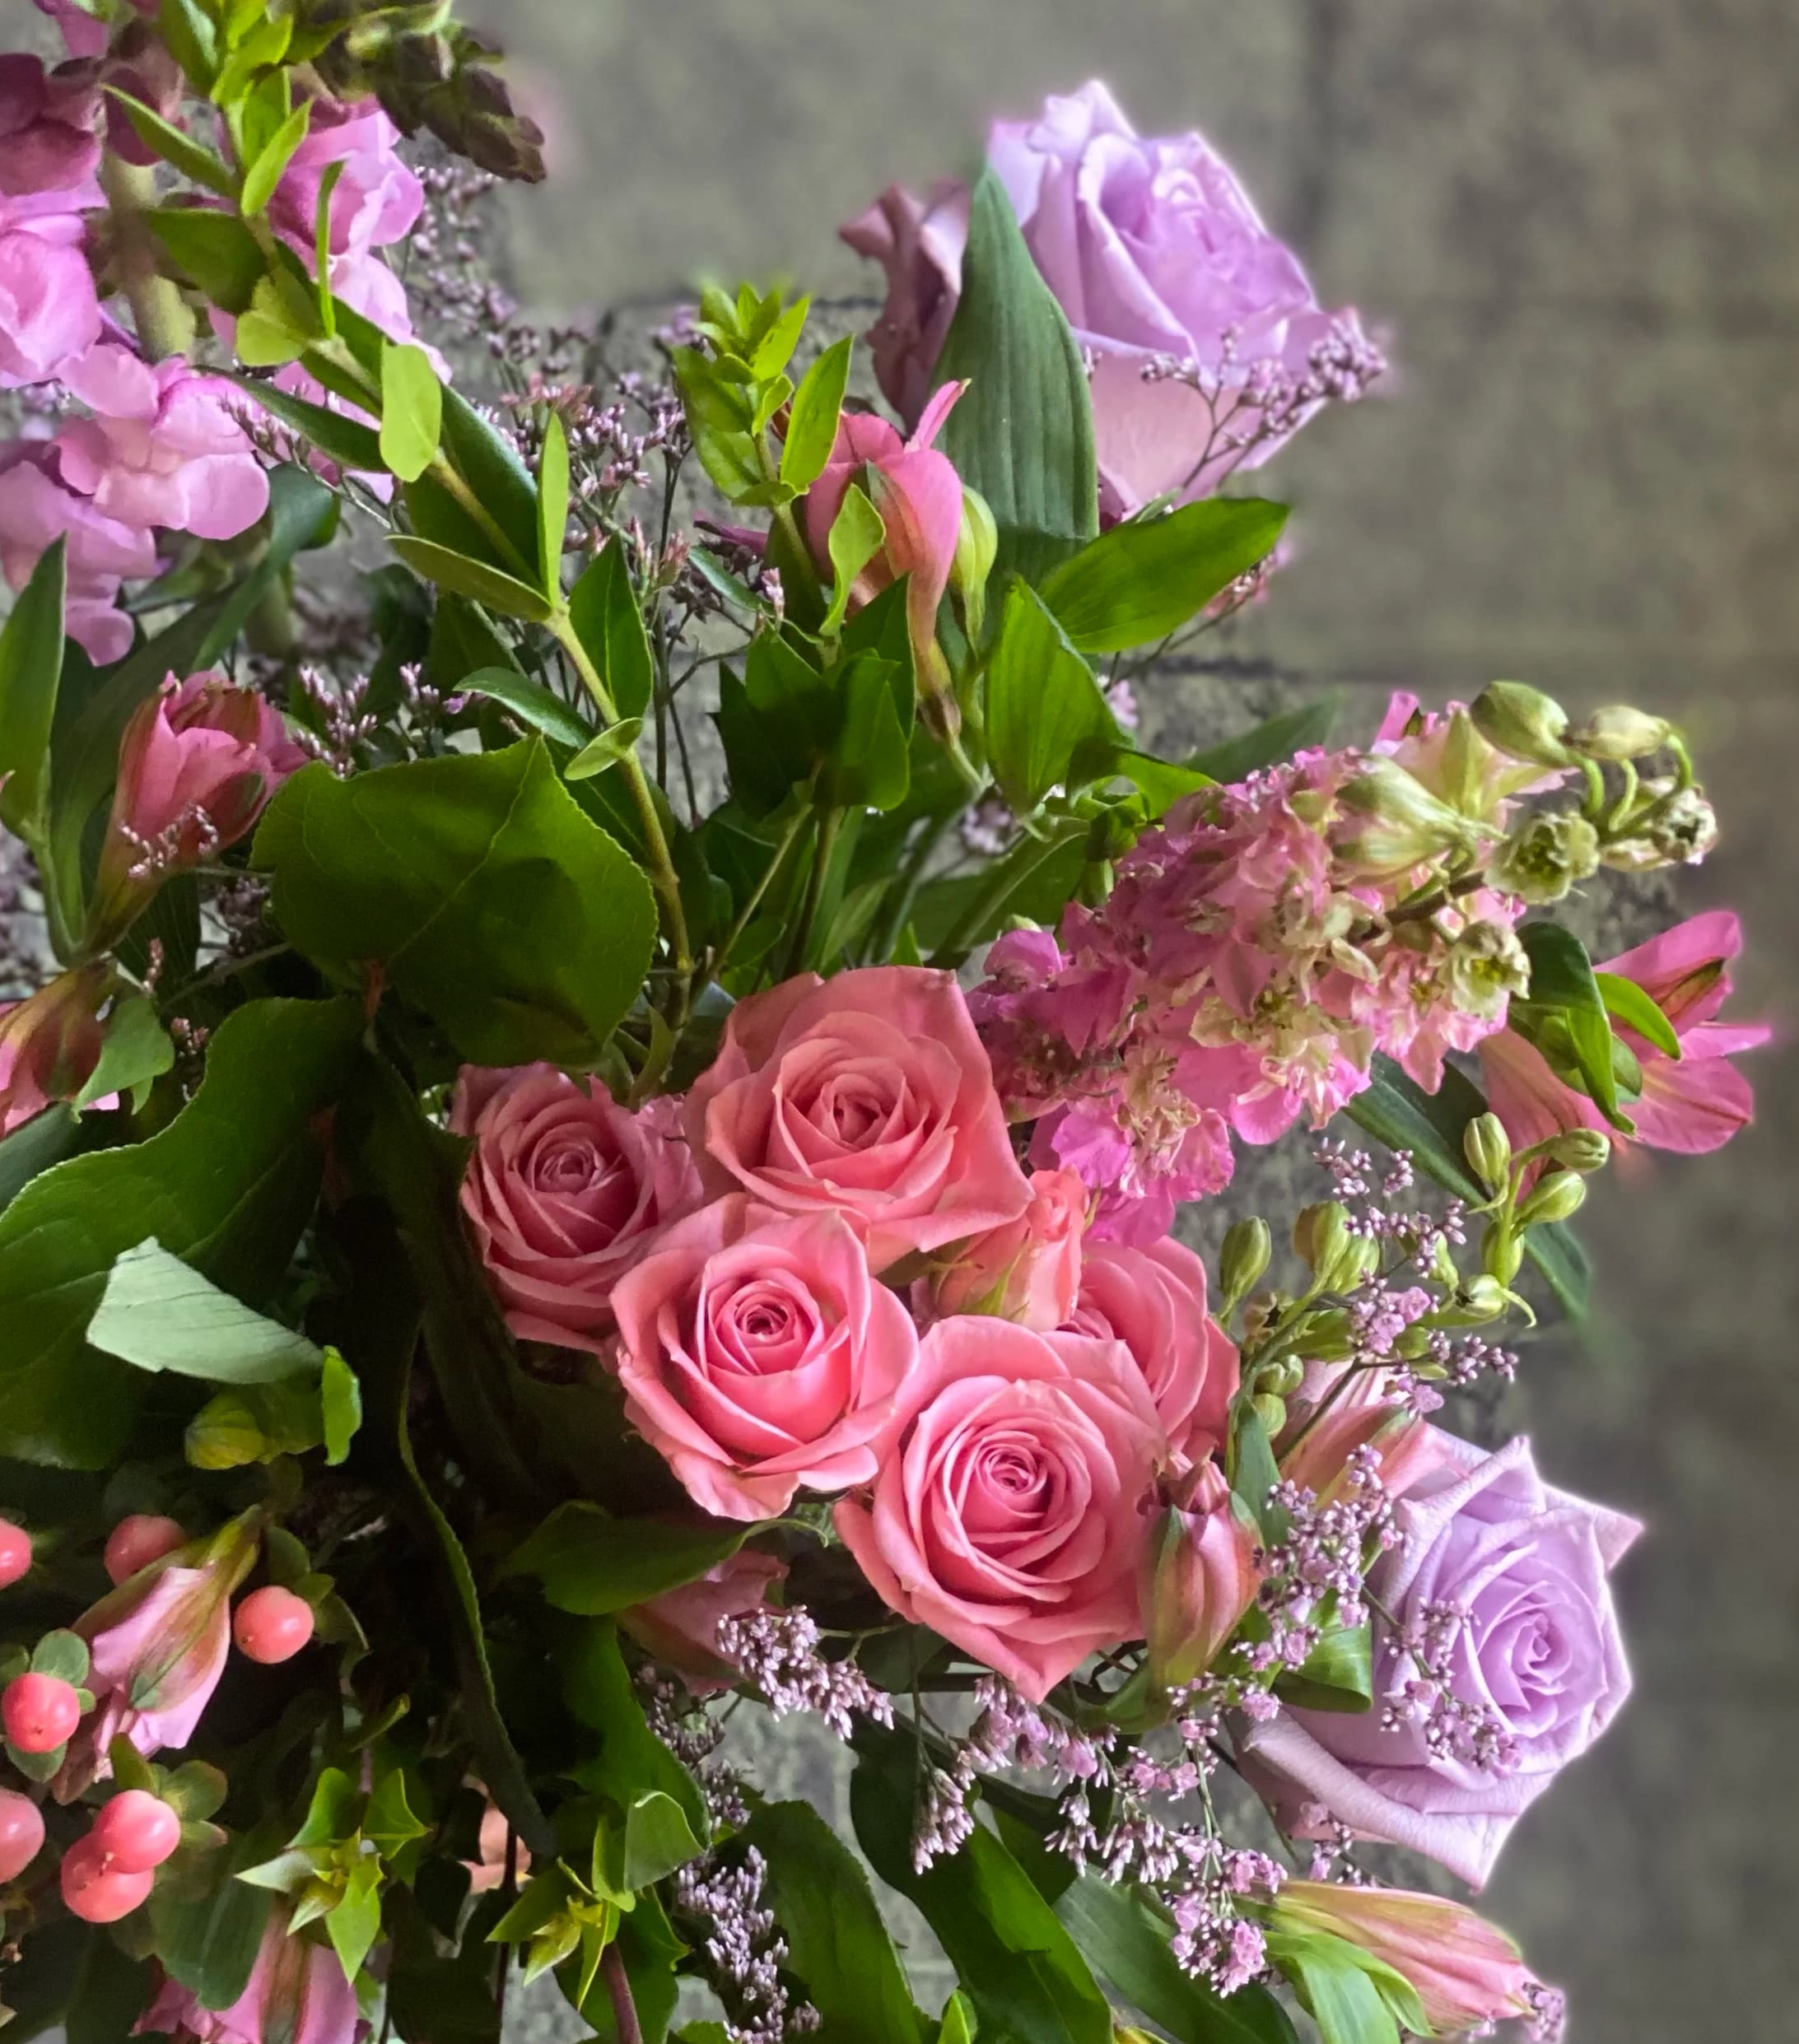 Sweet Grand Bouquet - The &quot;Sweet Grand Bouquet&quot; has lavender and pink for its primary colors.   *Pictures are a representation of color pallets. The flowers in the photo may change based on availability. 